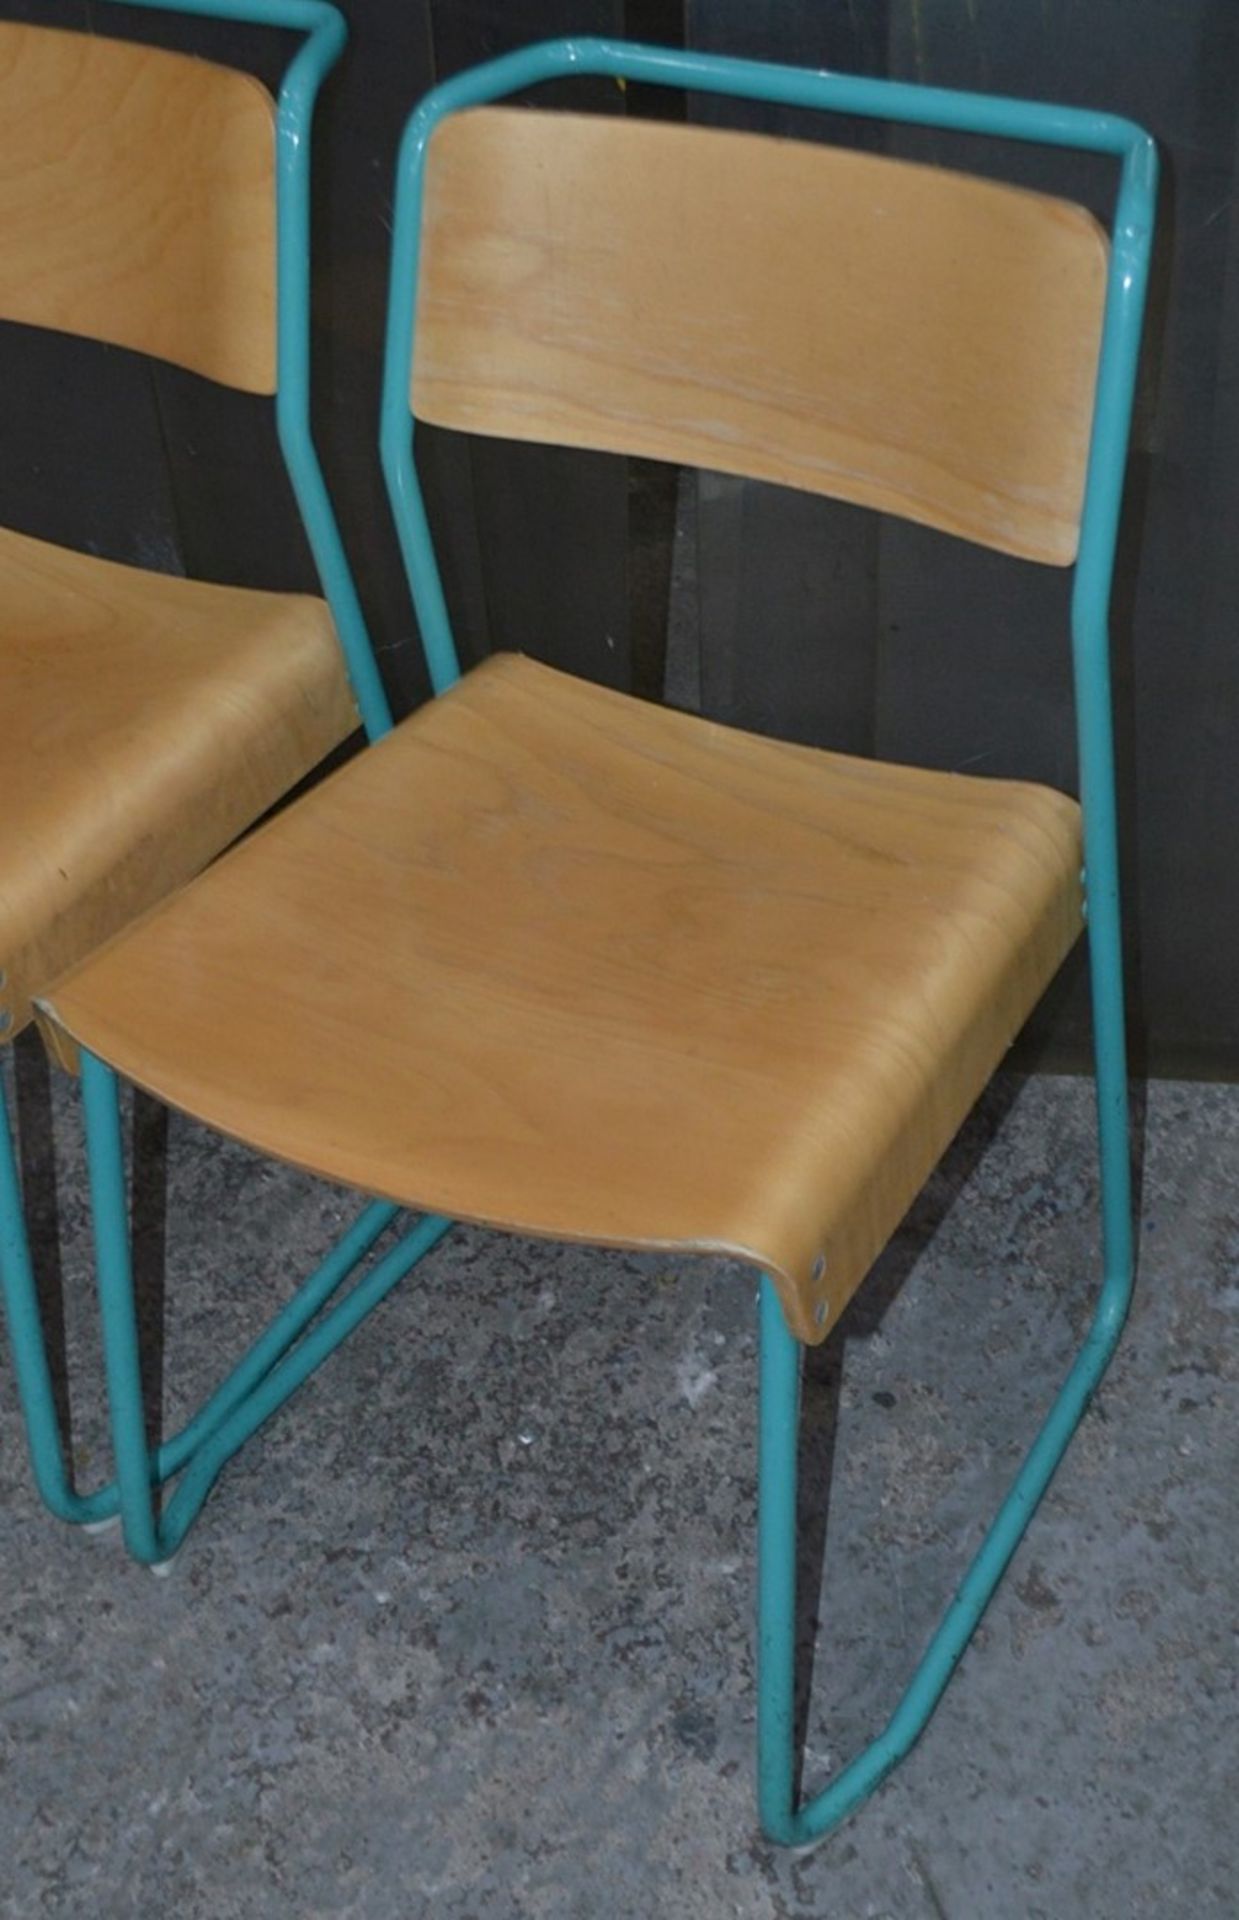 6 x Contemporary Stackable Bistro / Bar Chairs With Metal Frames With Curved Vanished Wooden Seats - Image 2 of 12